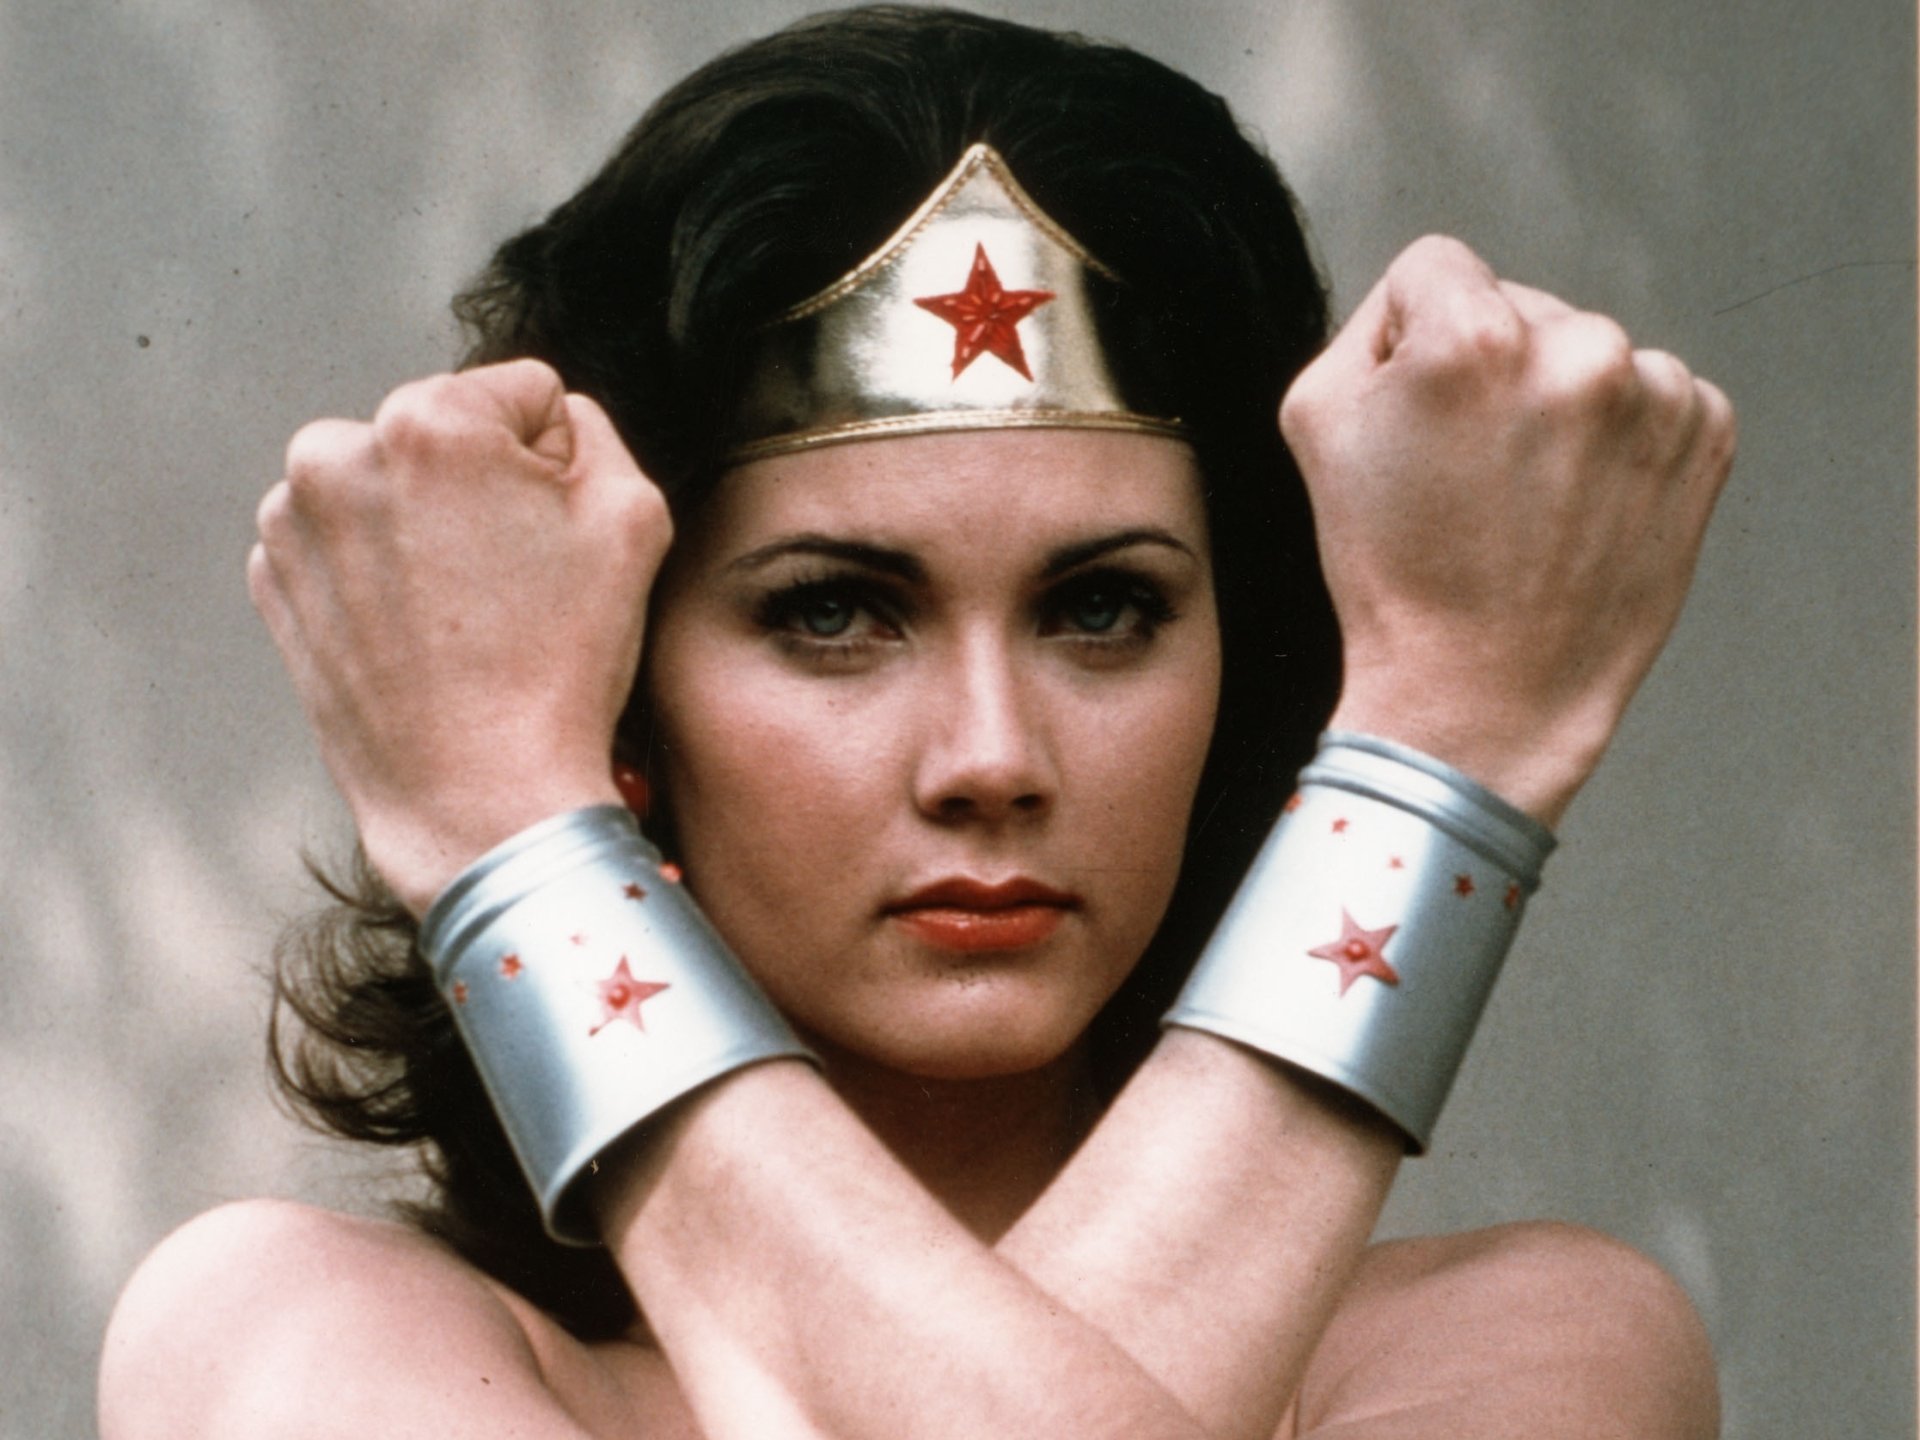 Wonder Woman (1975) Full HD Wallpaper and Background Image | 2234x1675 ...